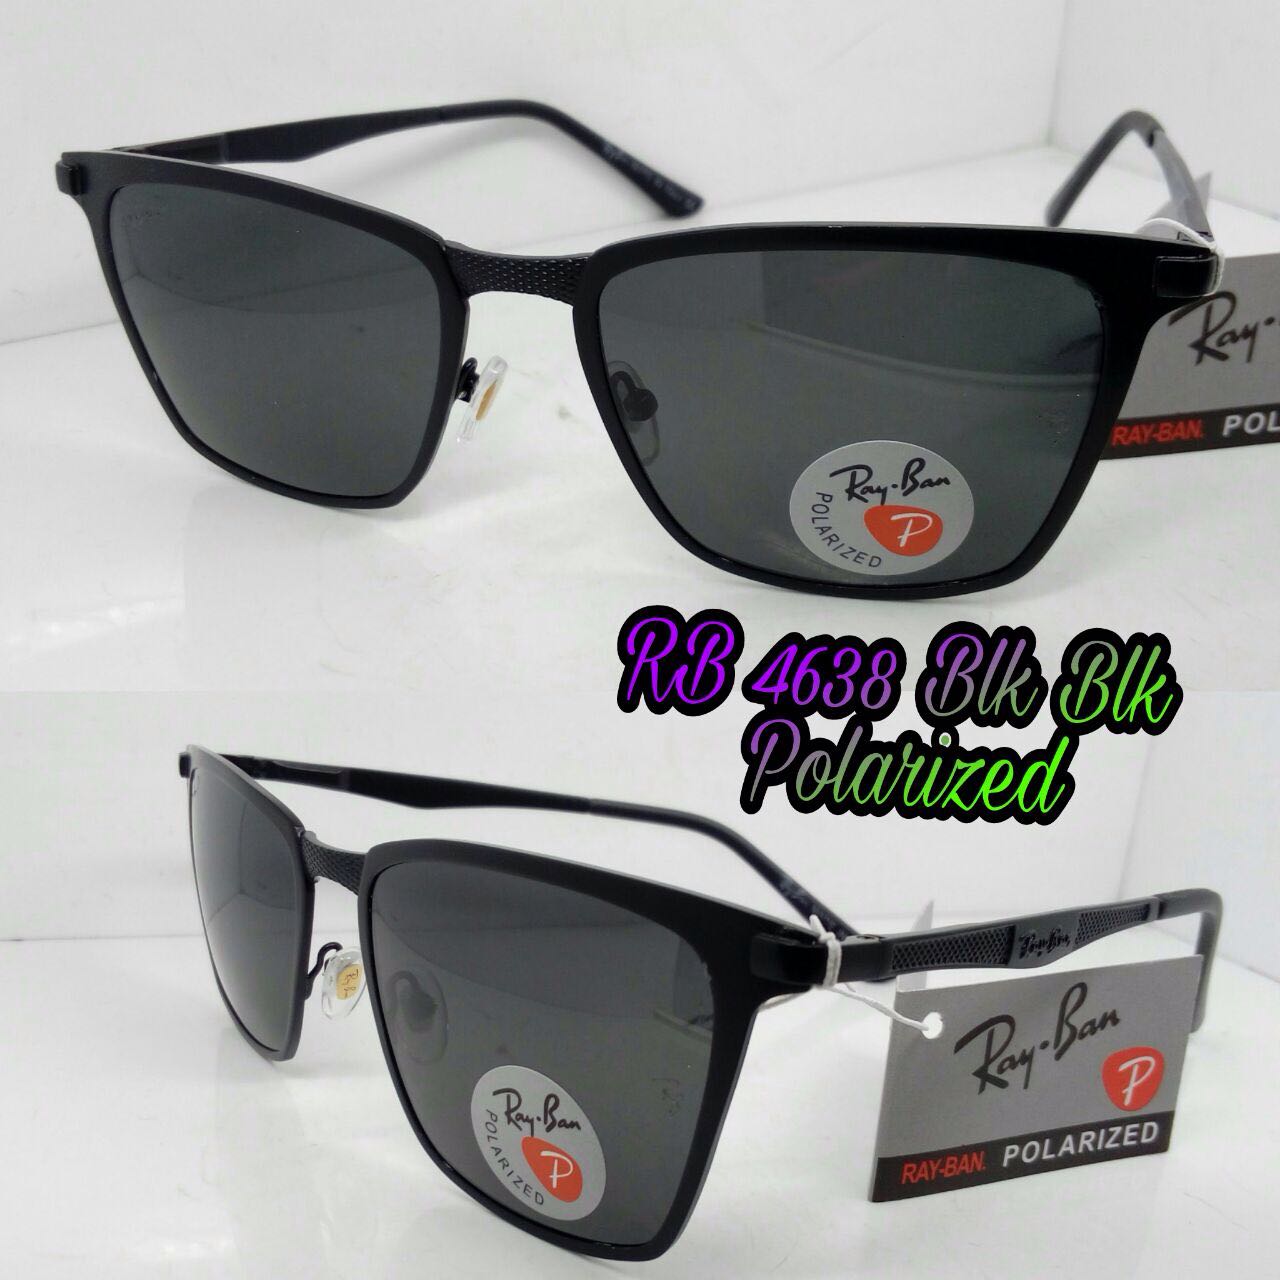 First Copy Ray Ban Sunglasses India Rs599 Only Rb4638 Polarized New Arrival Ray Ban Price 799 Only